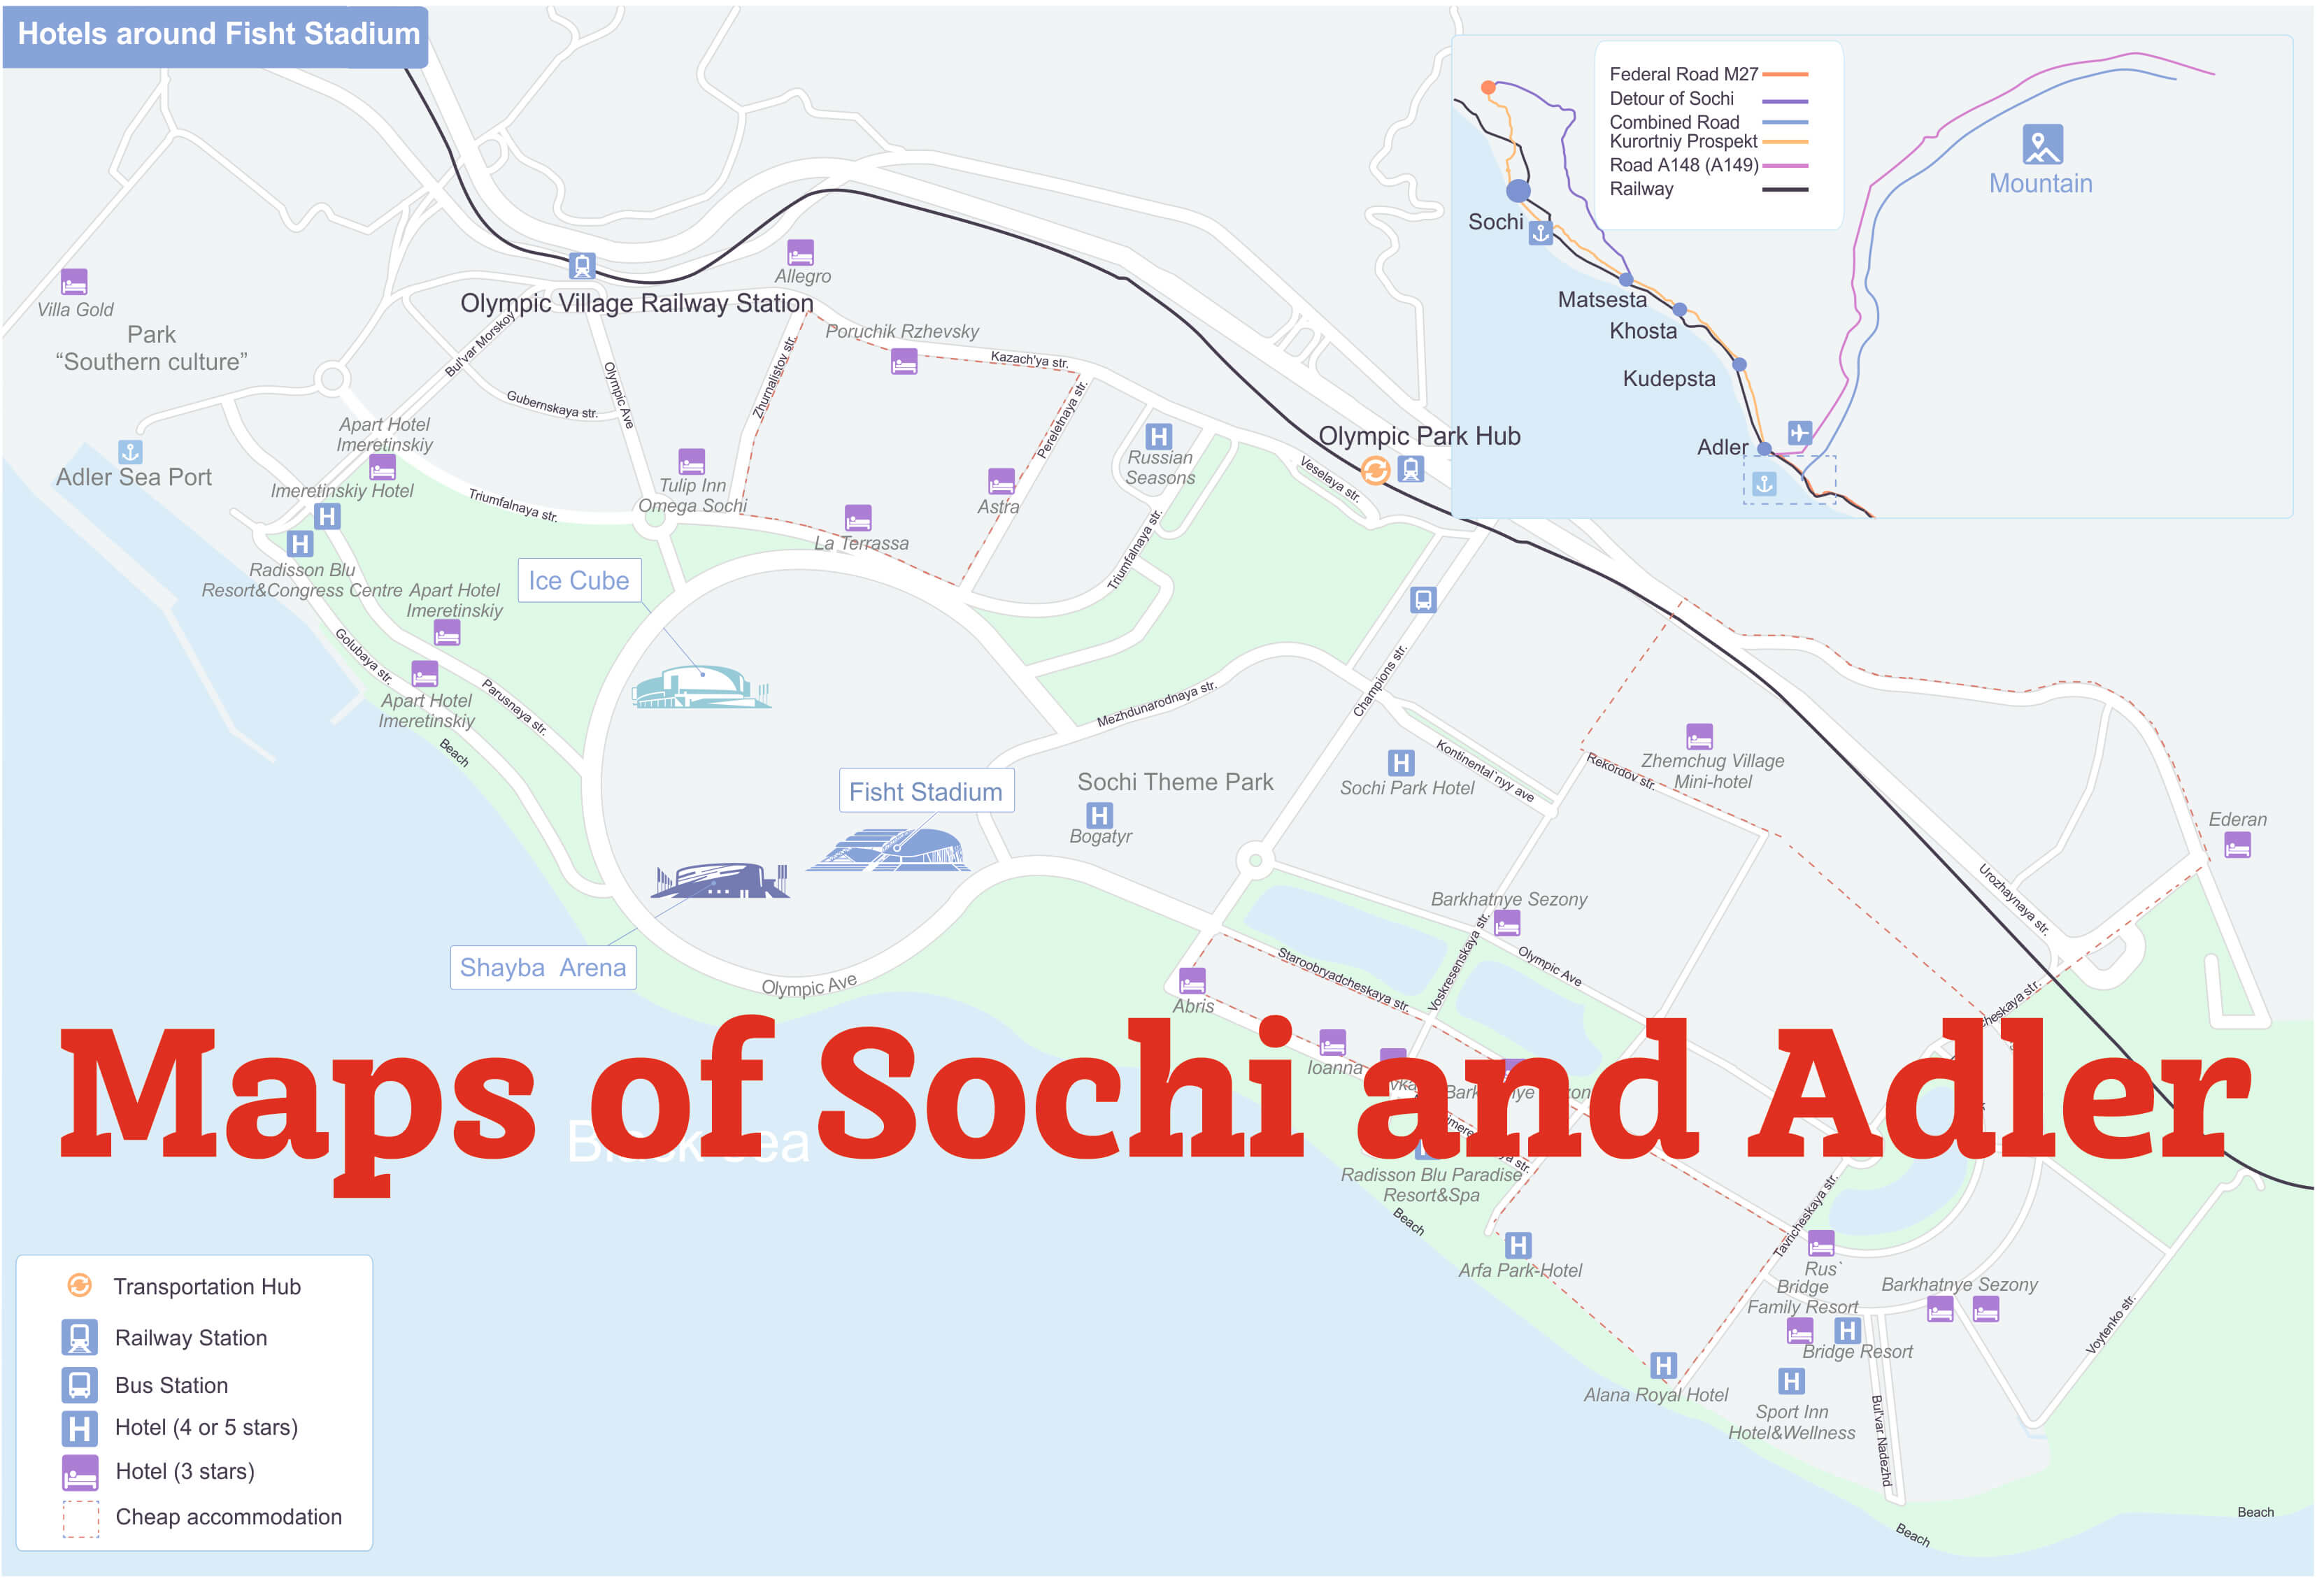 Maps of Sochi and Adler